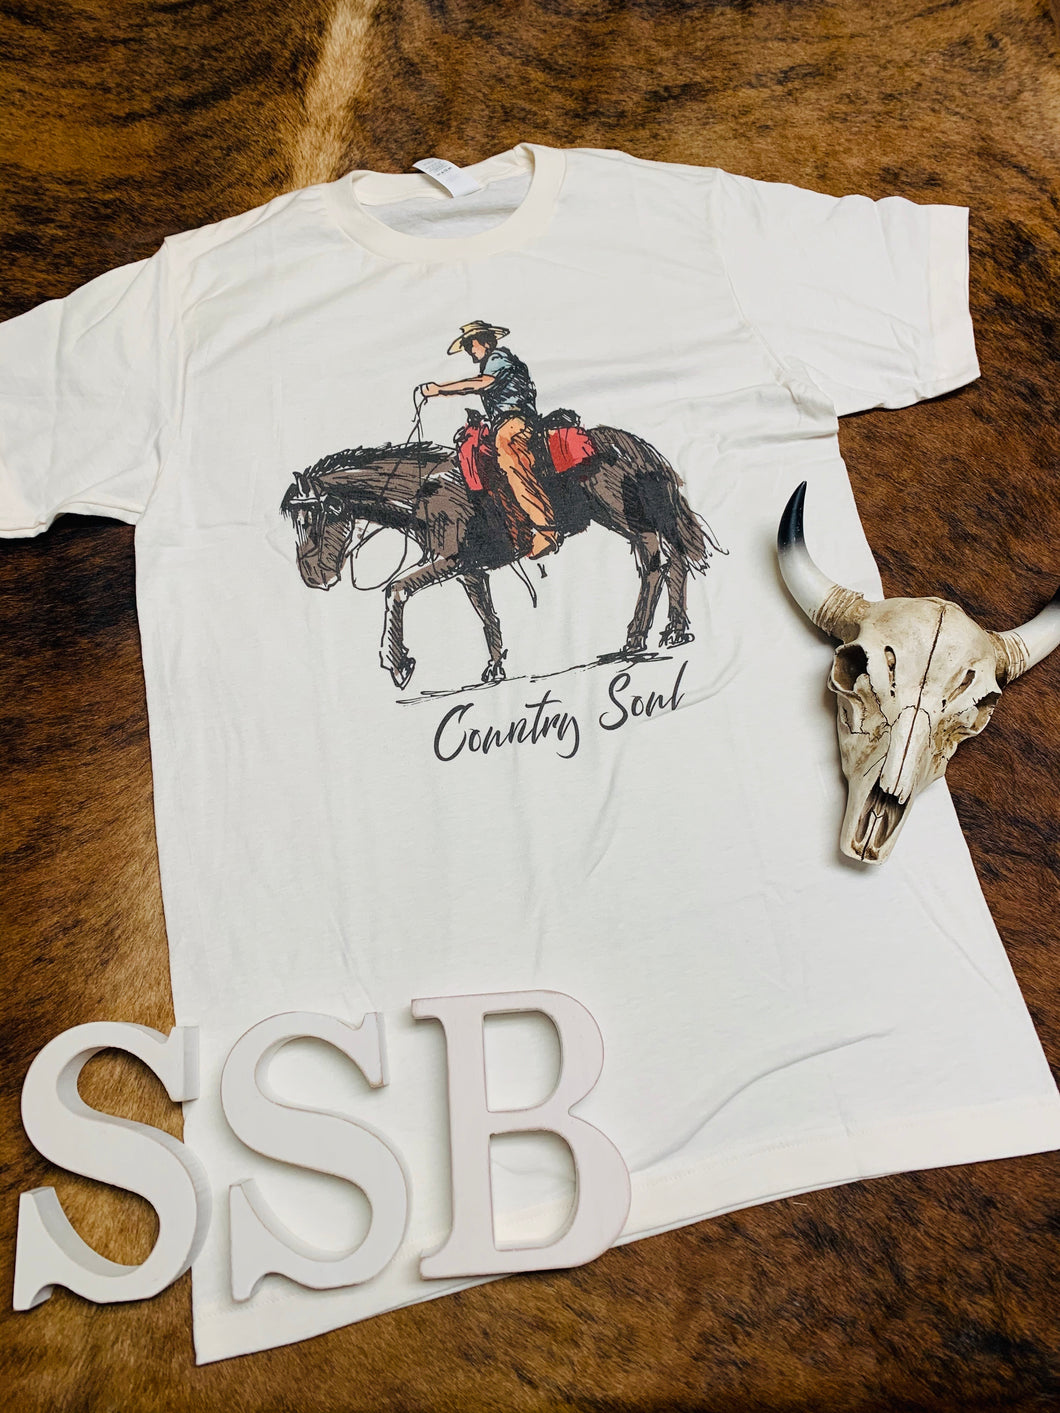 Country soul tee